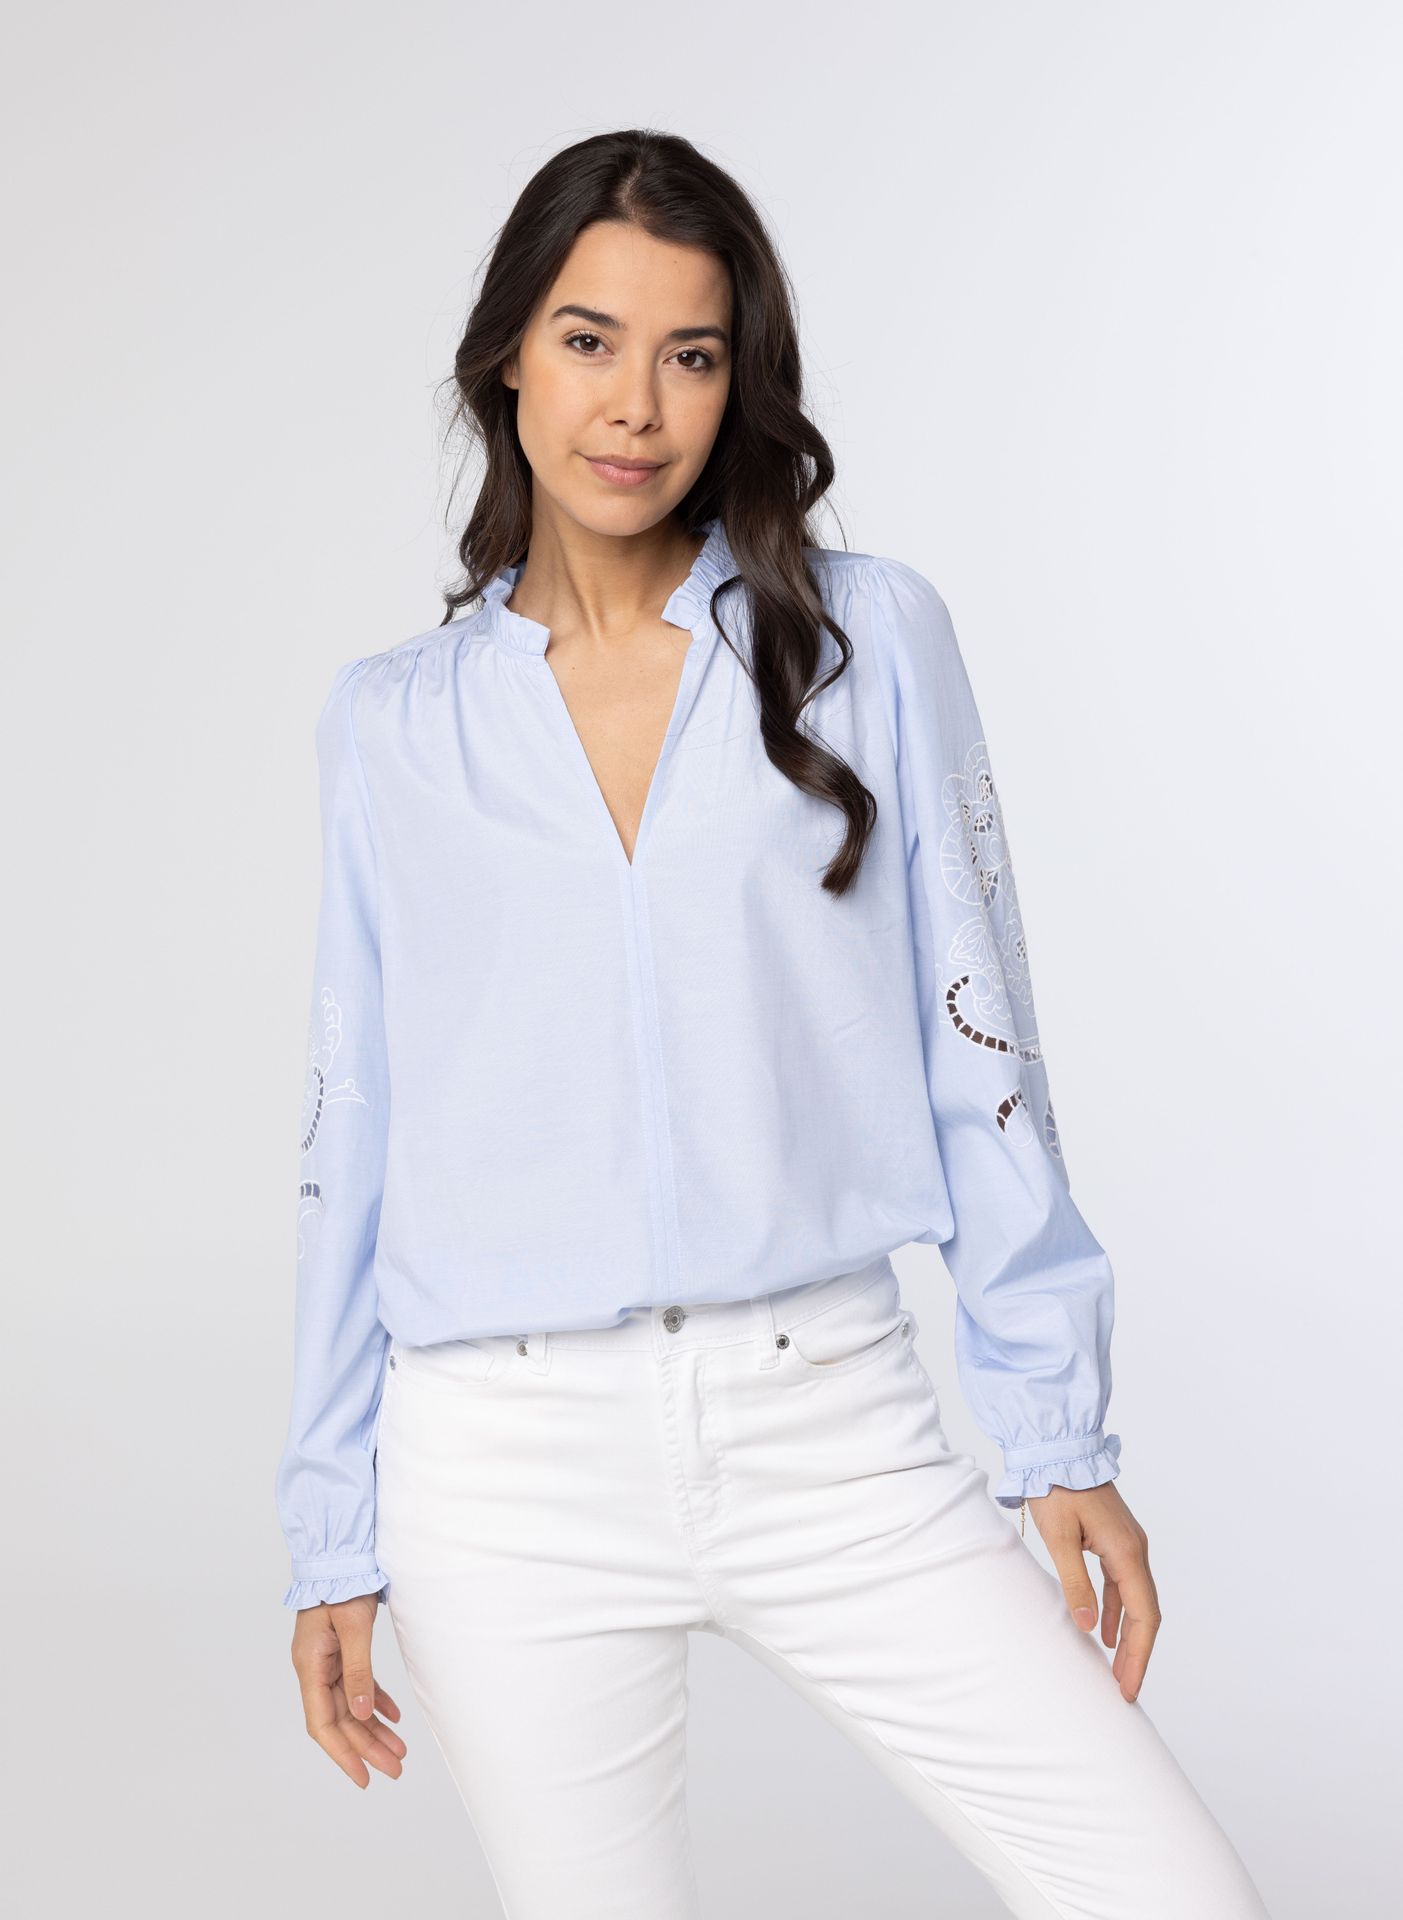 Norah Lichtblauwe blouse met embroidery light blue 213941-401